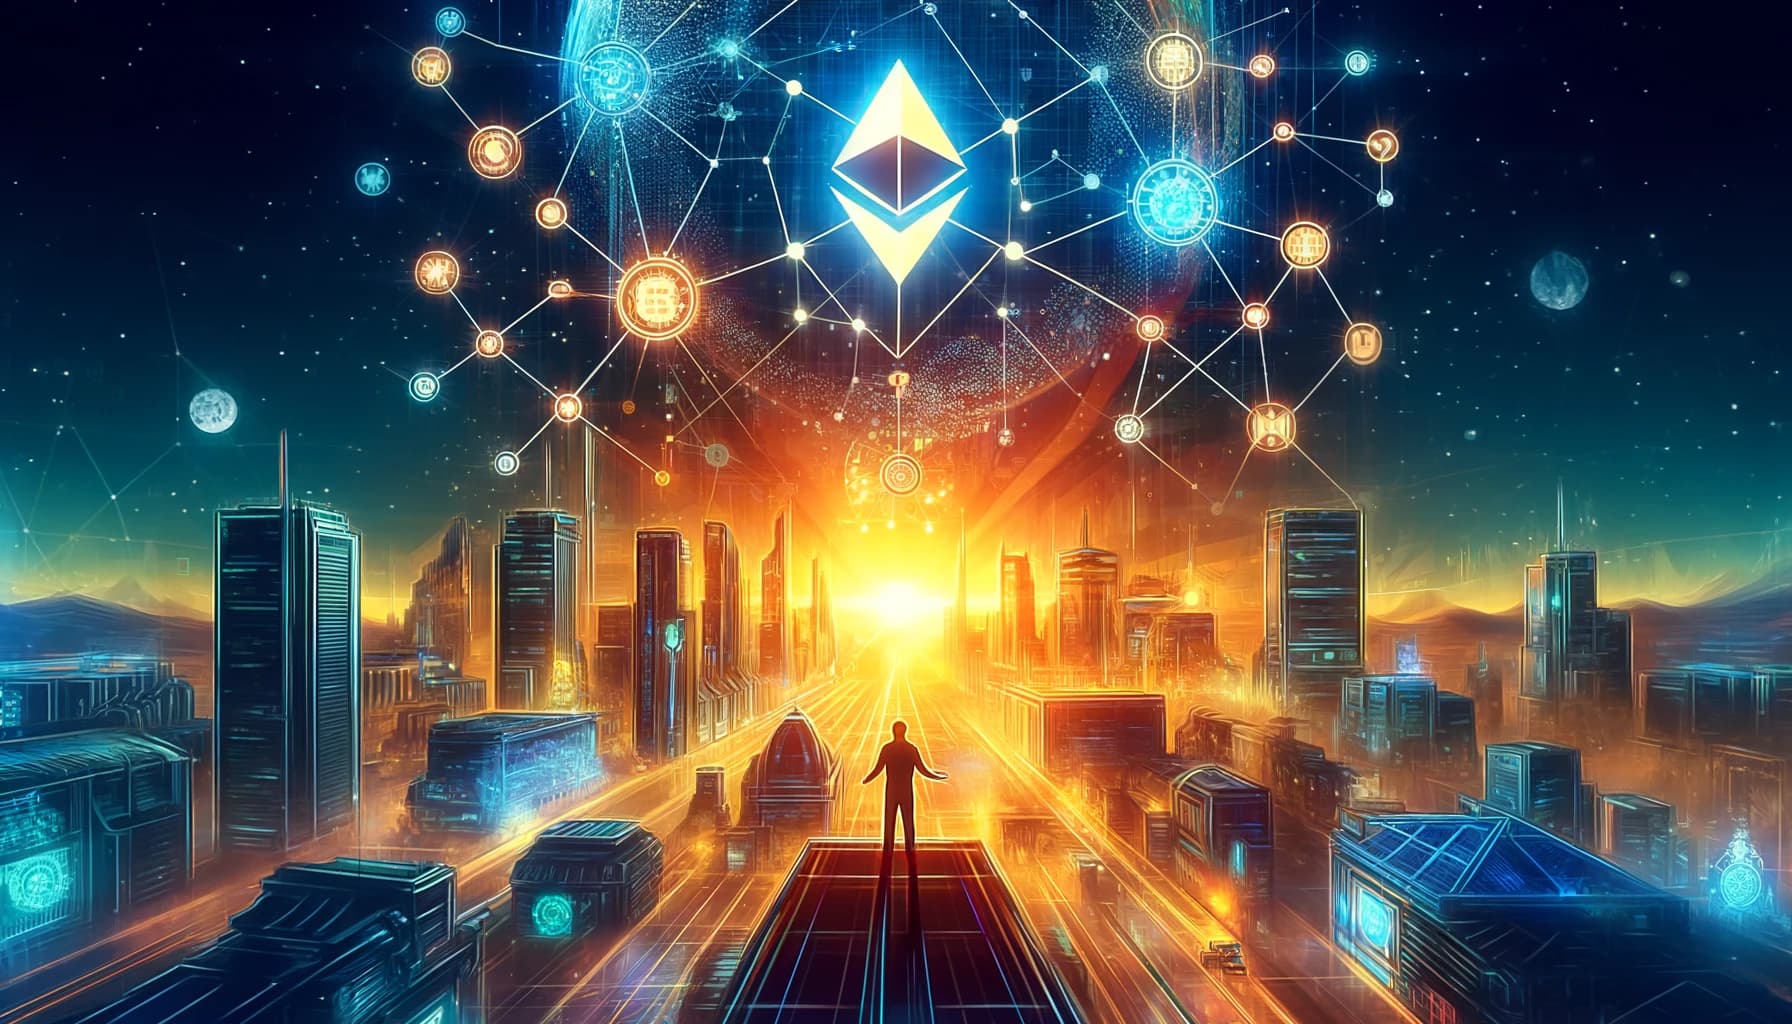 Bucket Technologies image showing an individual standing alone in the center of a lighted downtown city facing what appears to be a sunrise with bitcoin logos floating in the night sky above.